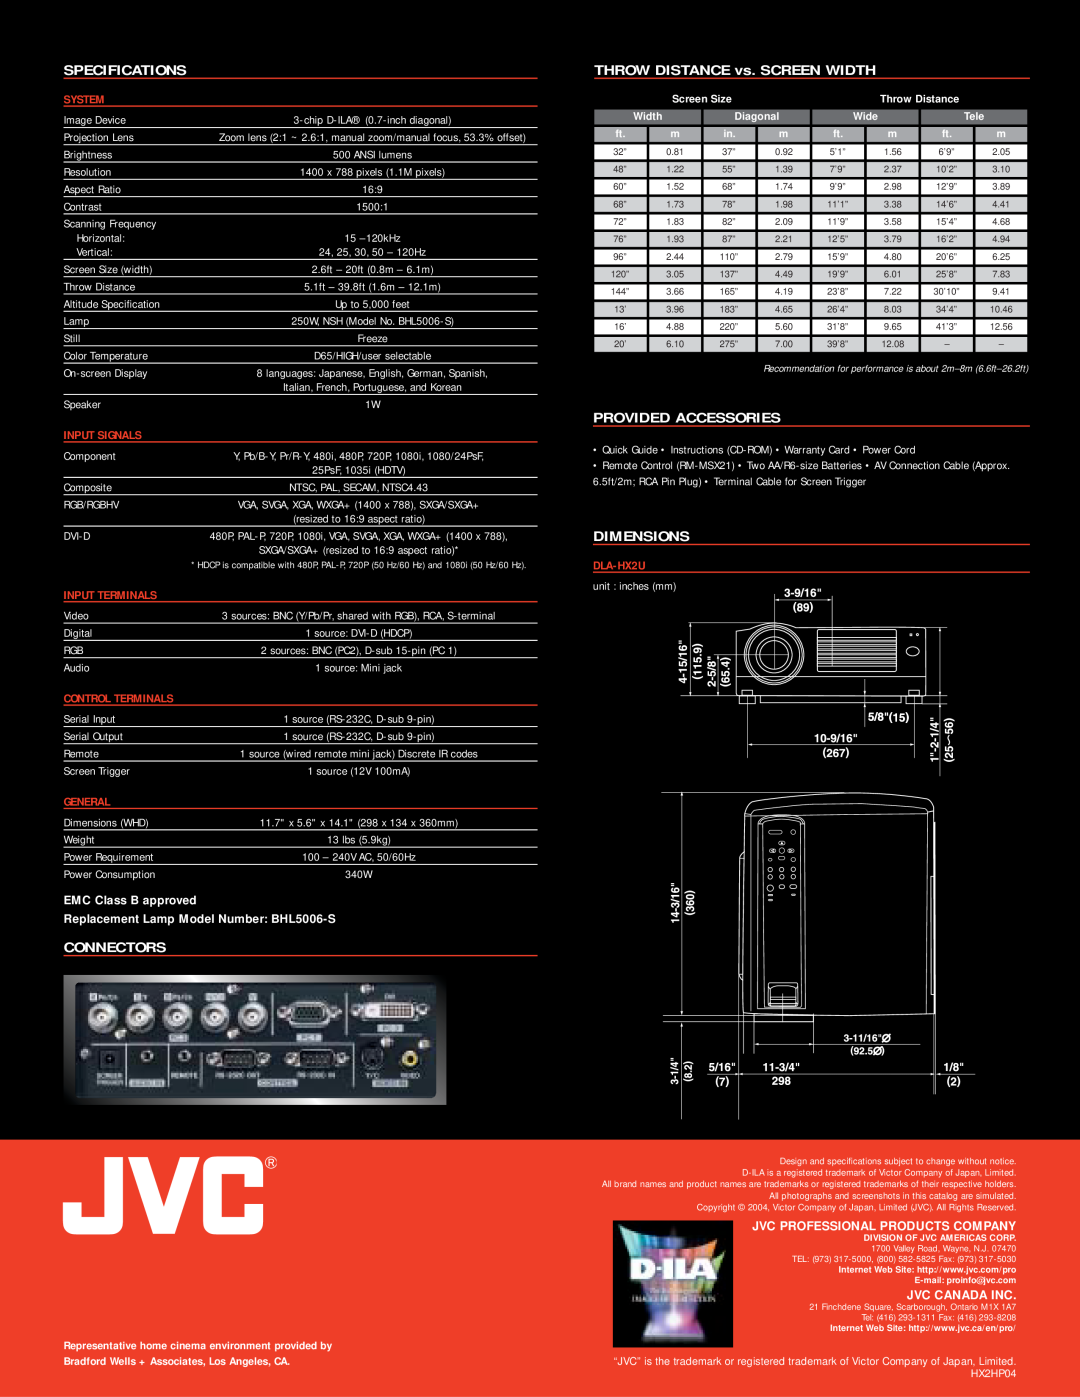 JVC DLA-HX2U3 manual Specifications, Connectors, THROW DISTANCE vs. SCREEN WIDTH, Provided Accessories, Dimensions, System 